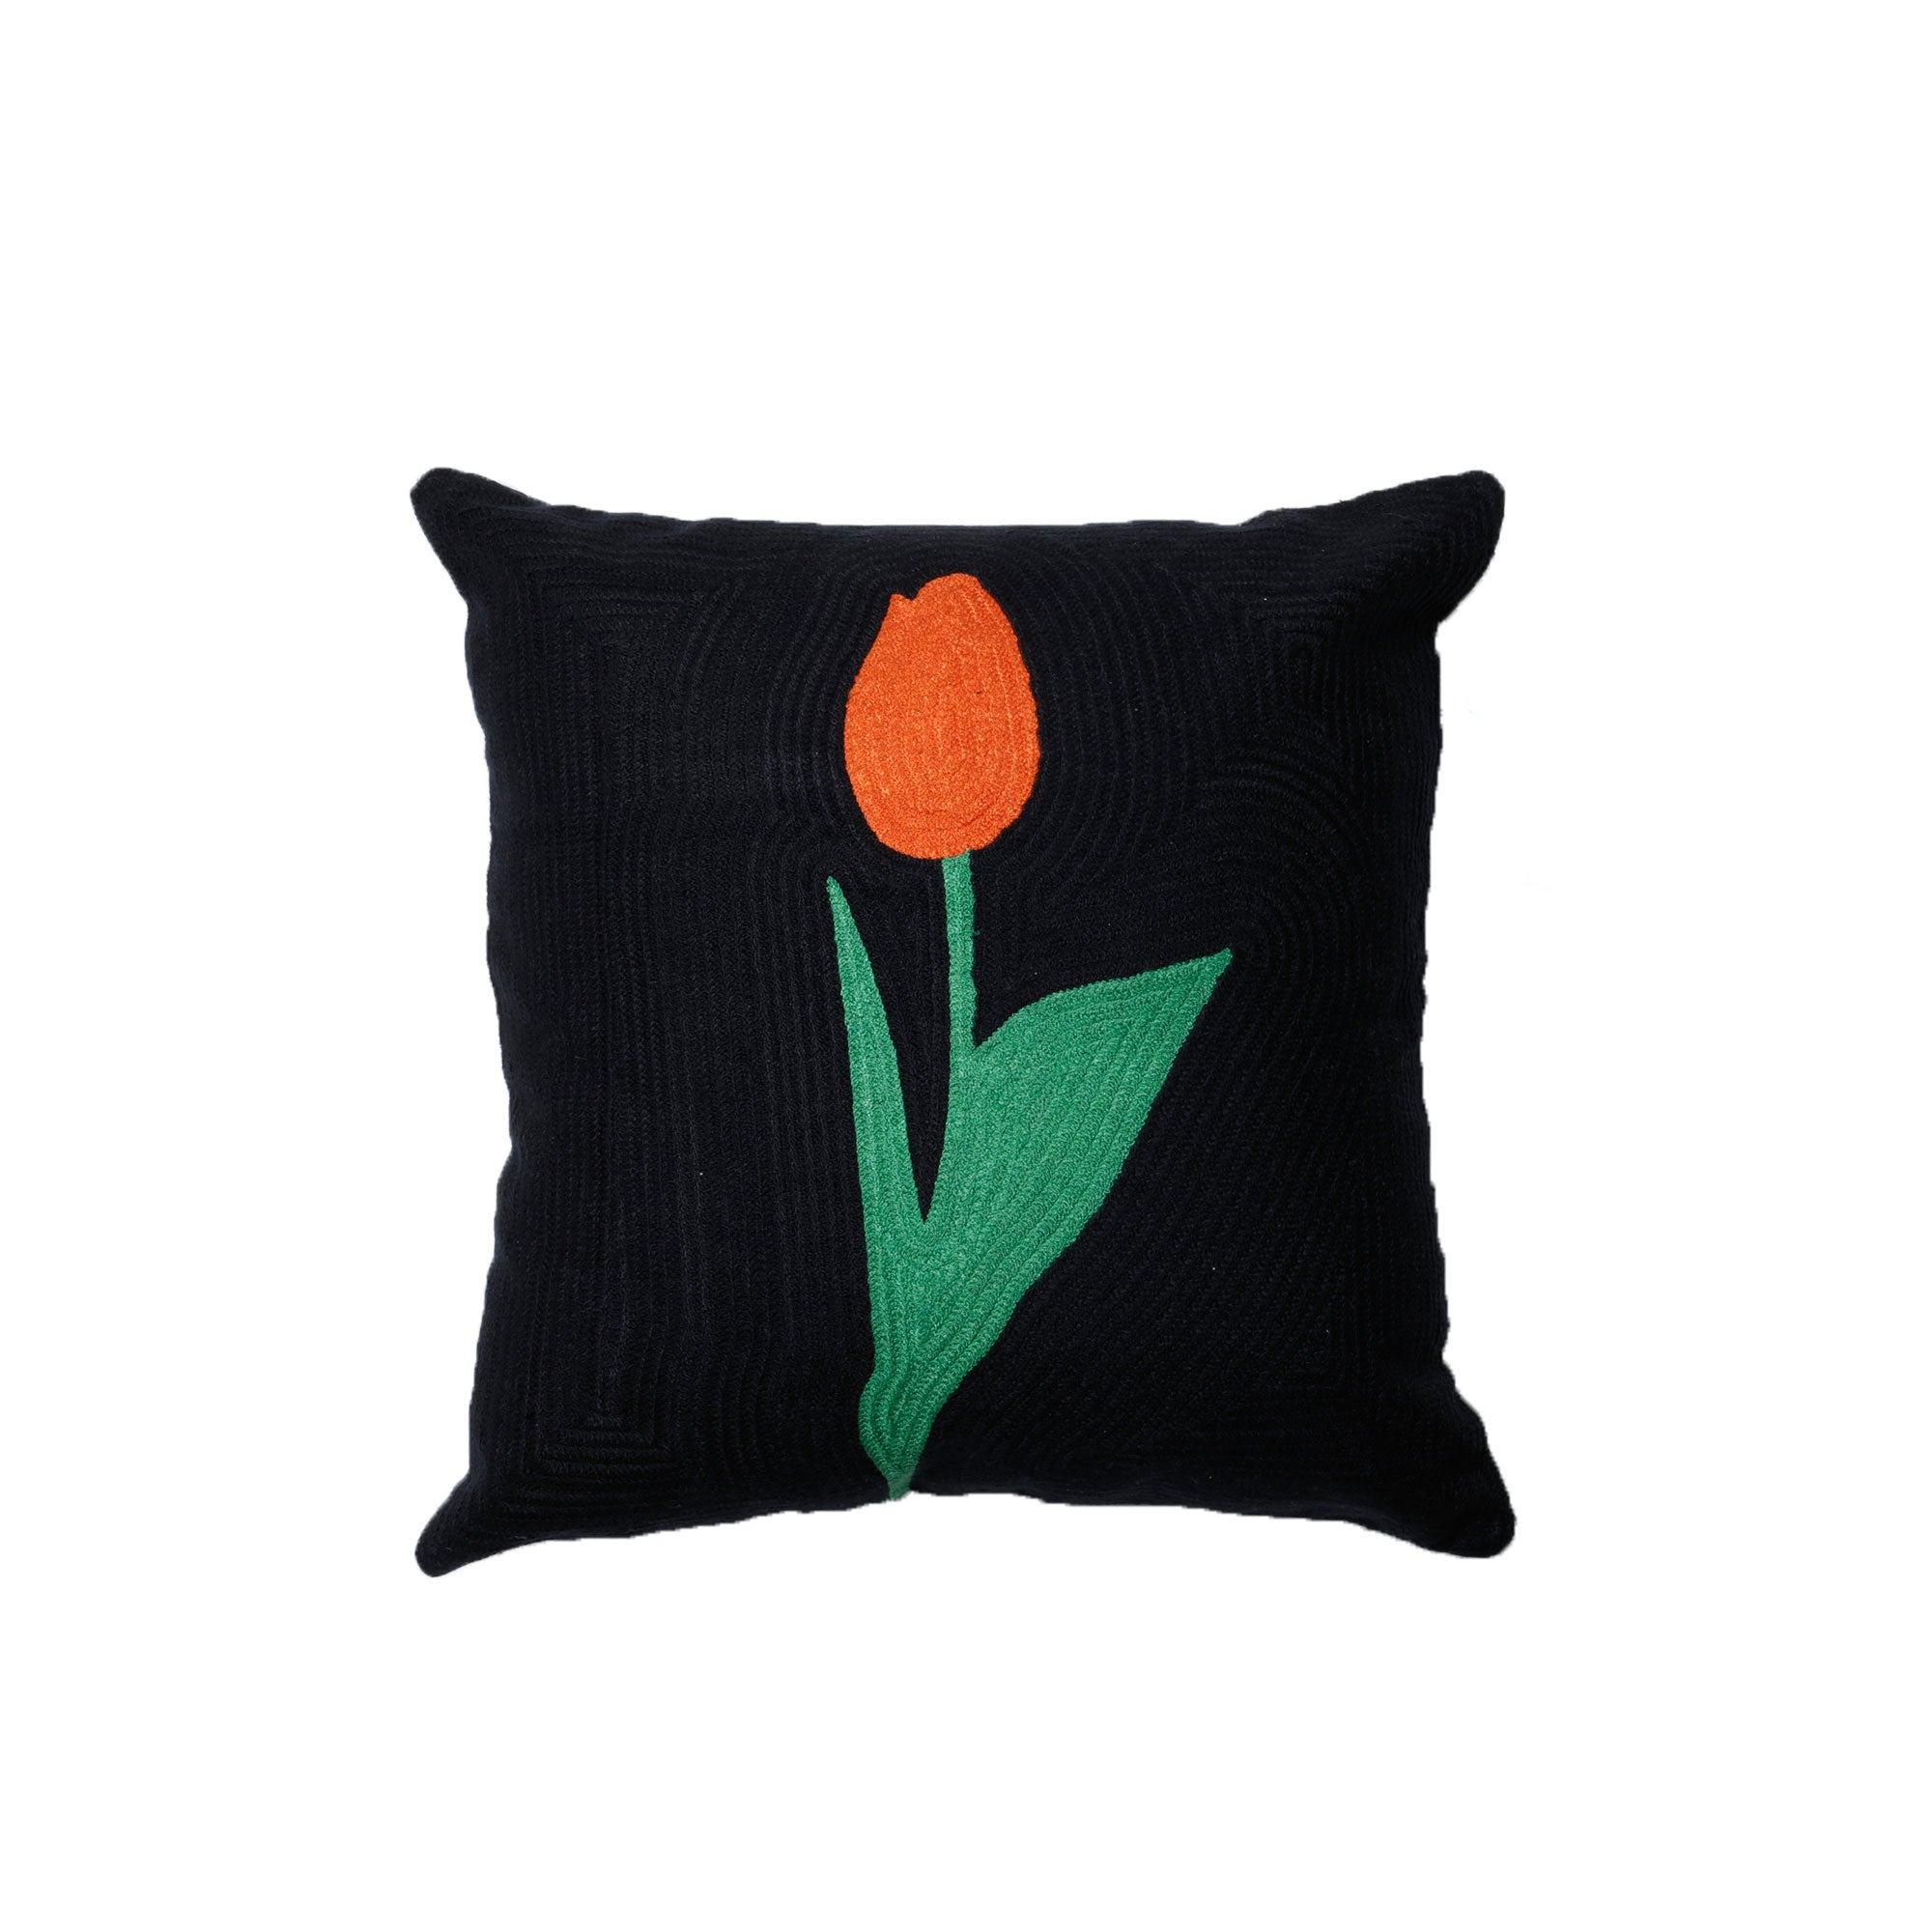 Tulip Cushion Cover with Pillow Insert